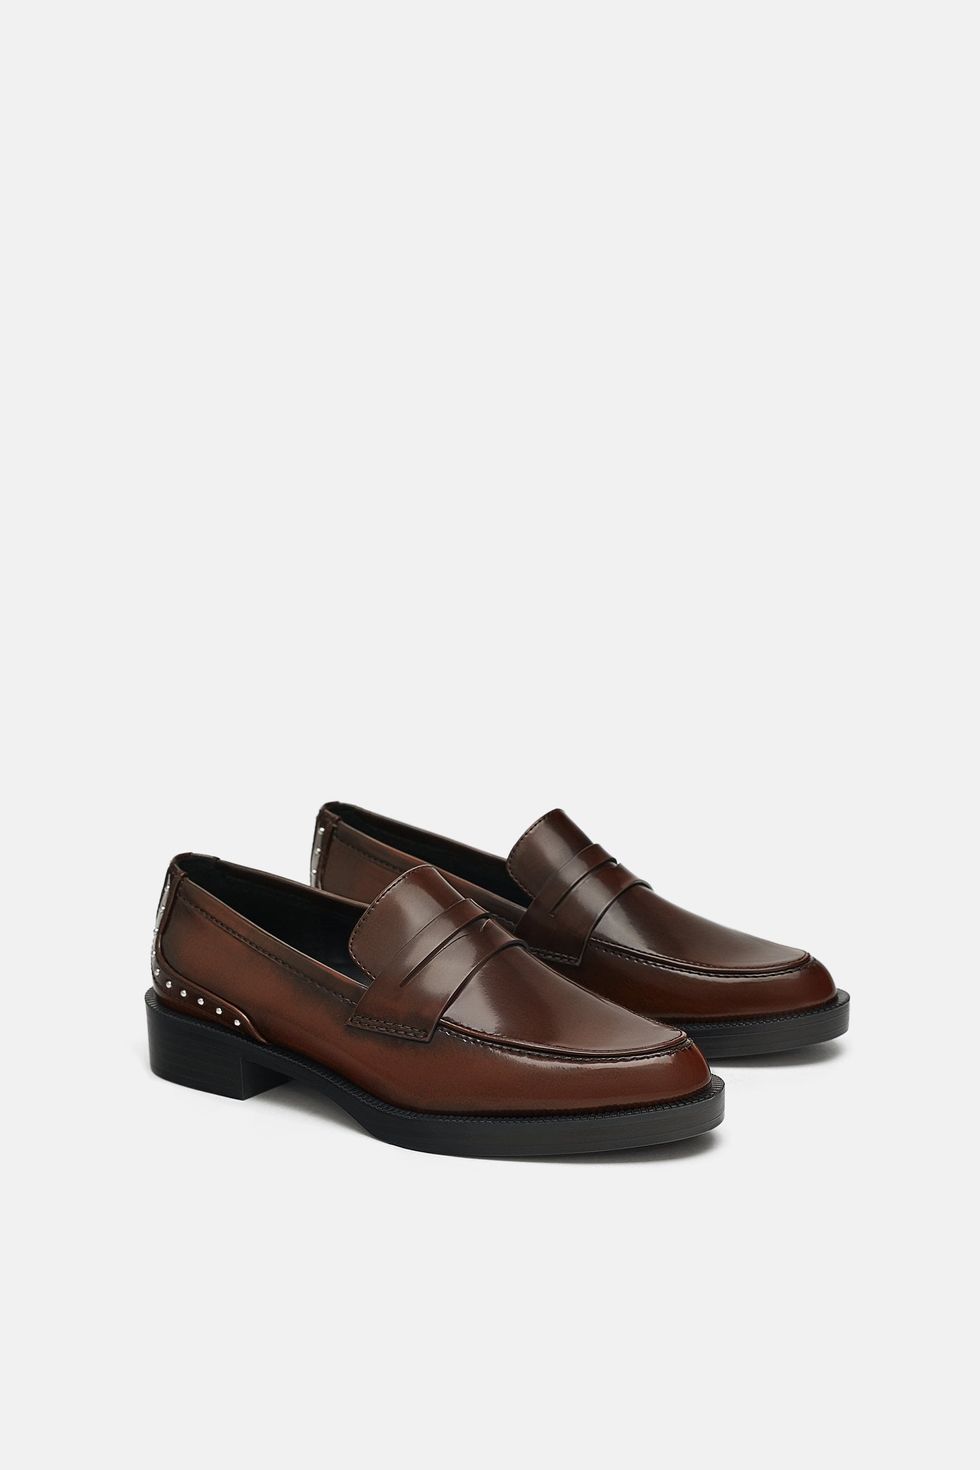 16 Pairs of Classic Loafers to Step Into This Spring - Brit + Co